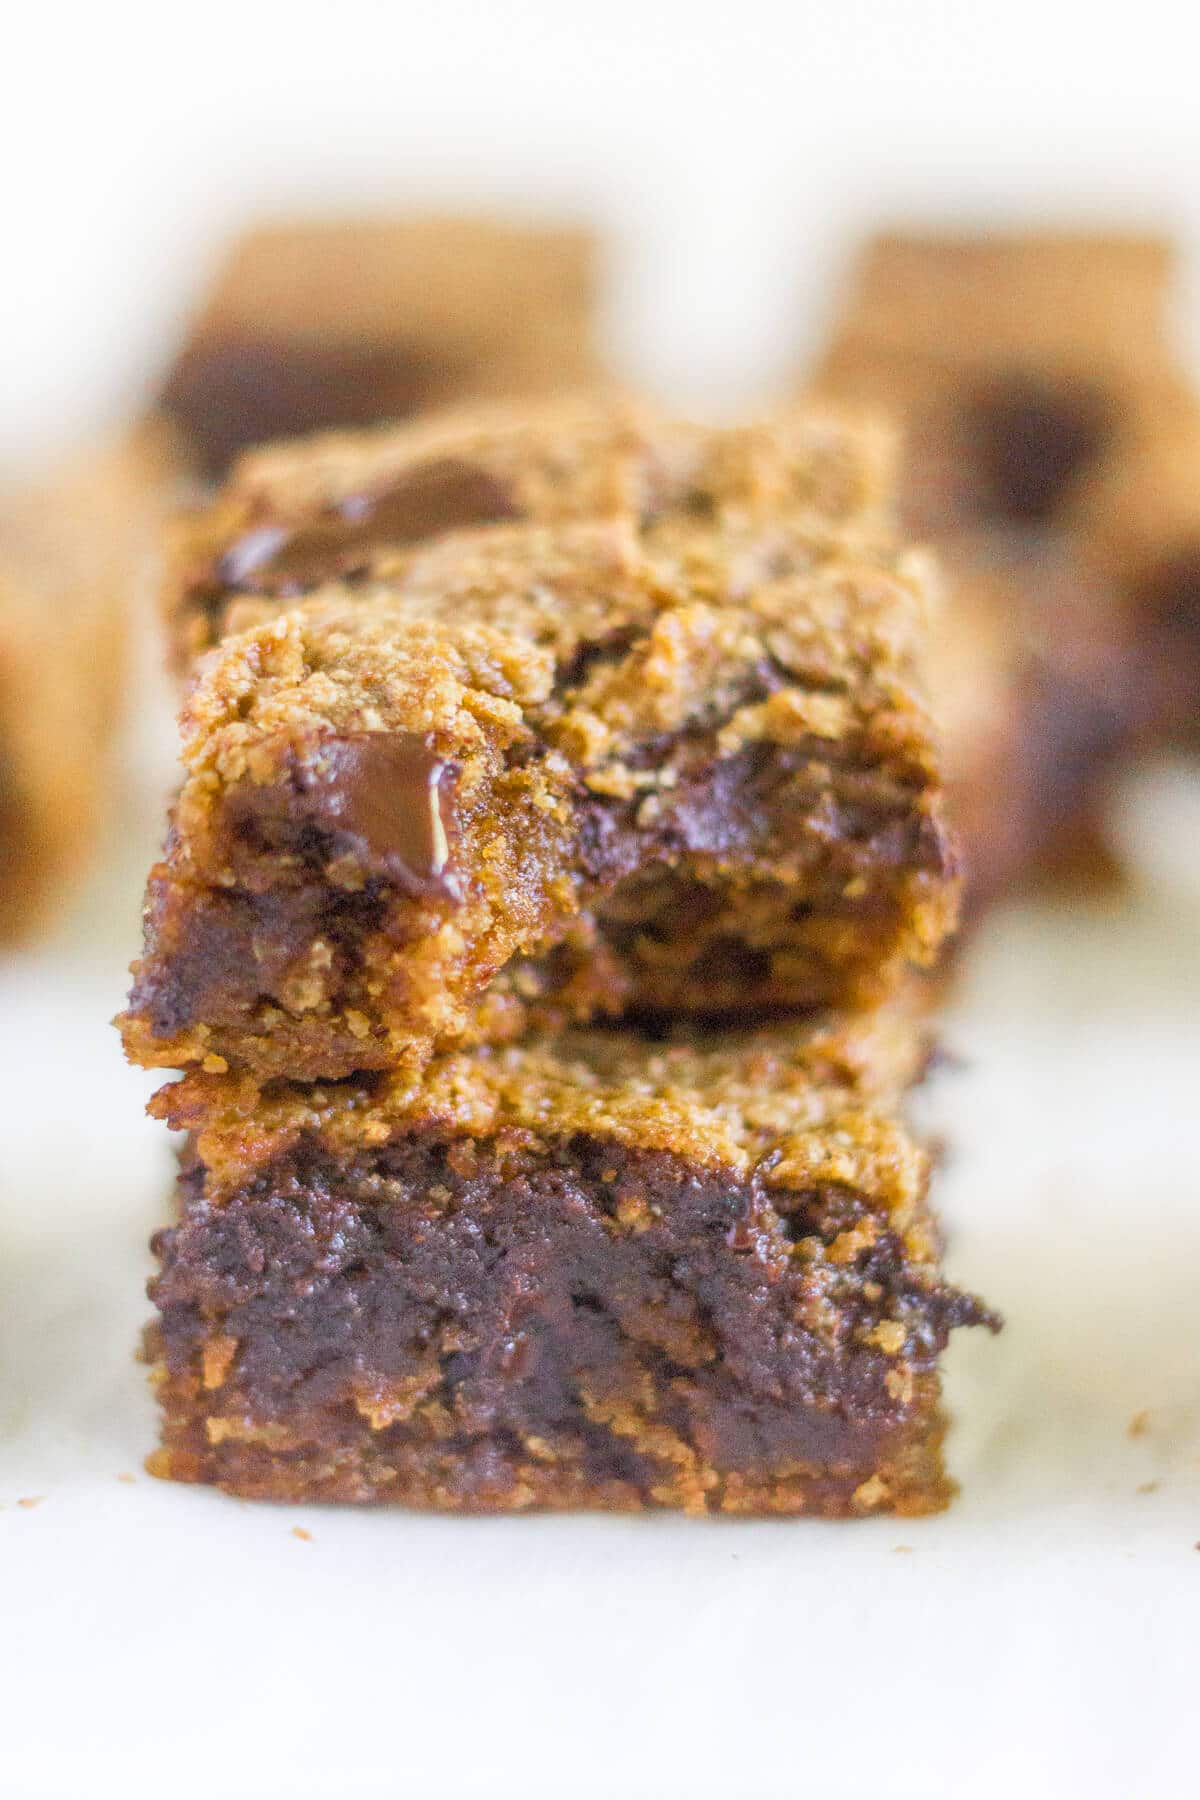 Paleo Pumpkin Chocolate Chunk Blondies are a healthier alternative to all your pumpkin desserts! These paleo blondies are thick and chewy and filled with pumpkin and extra large chocolate chunks.